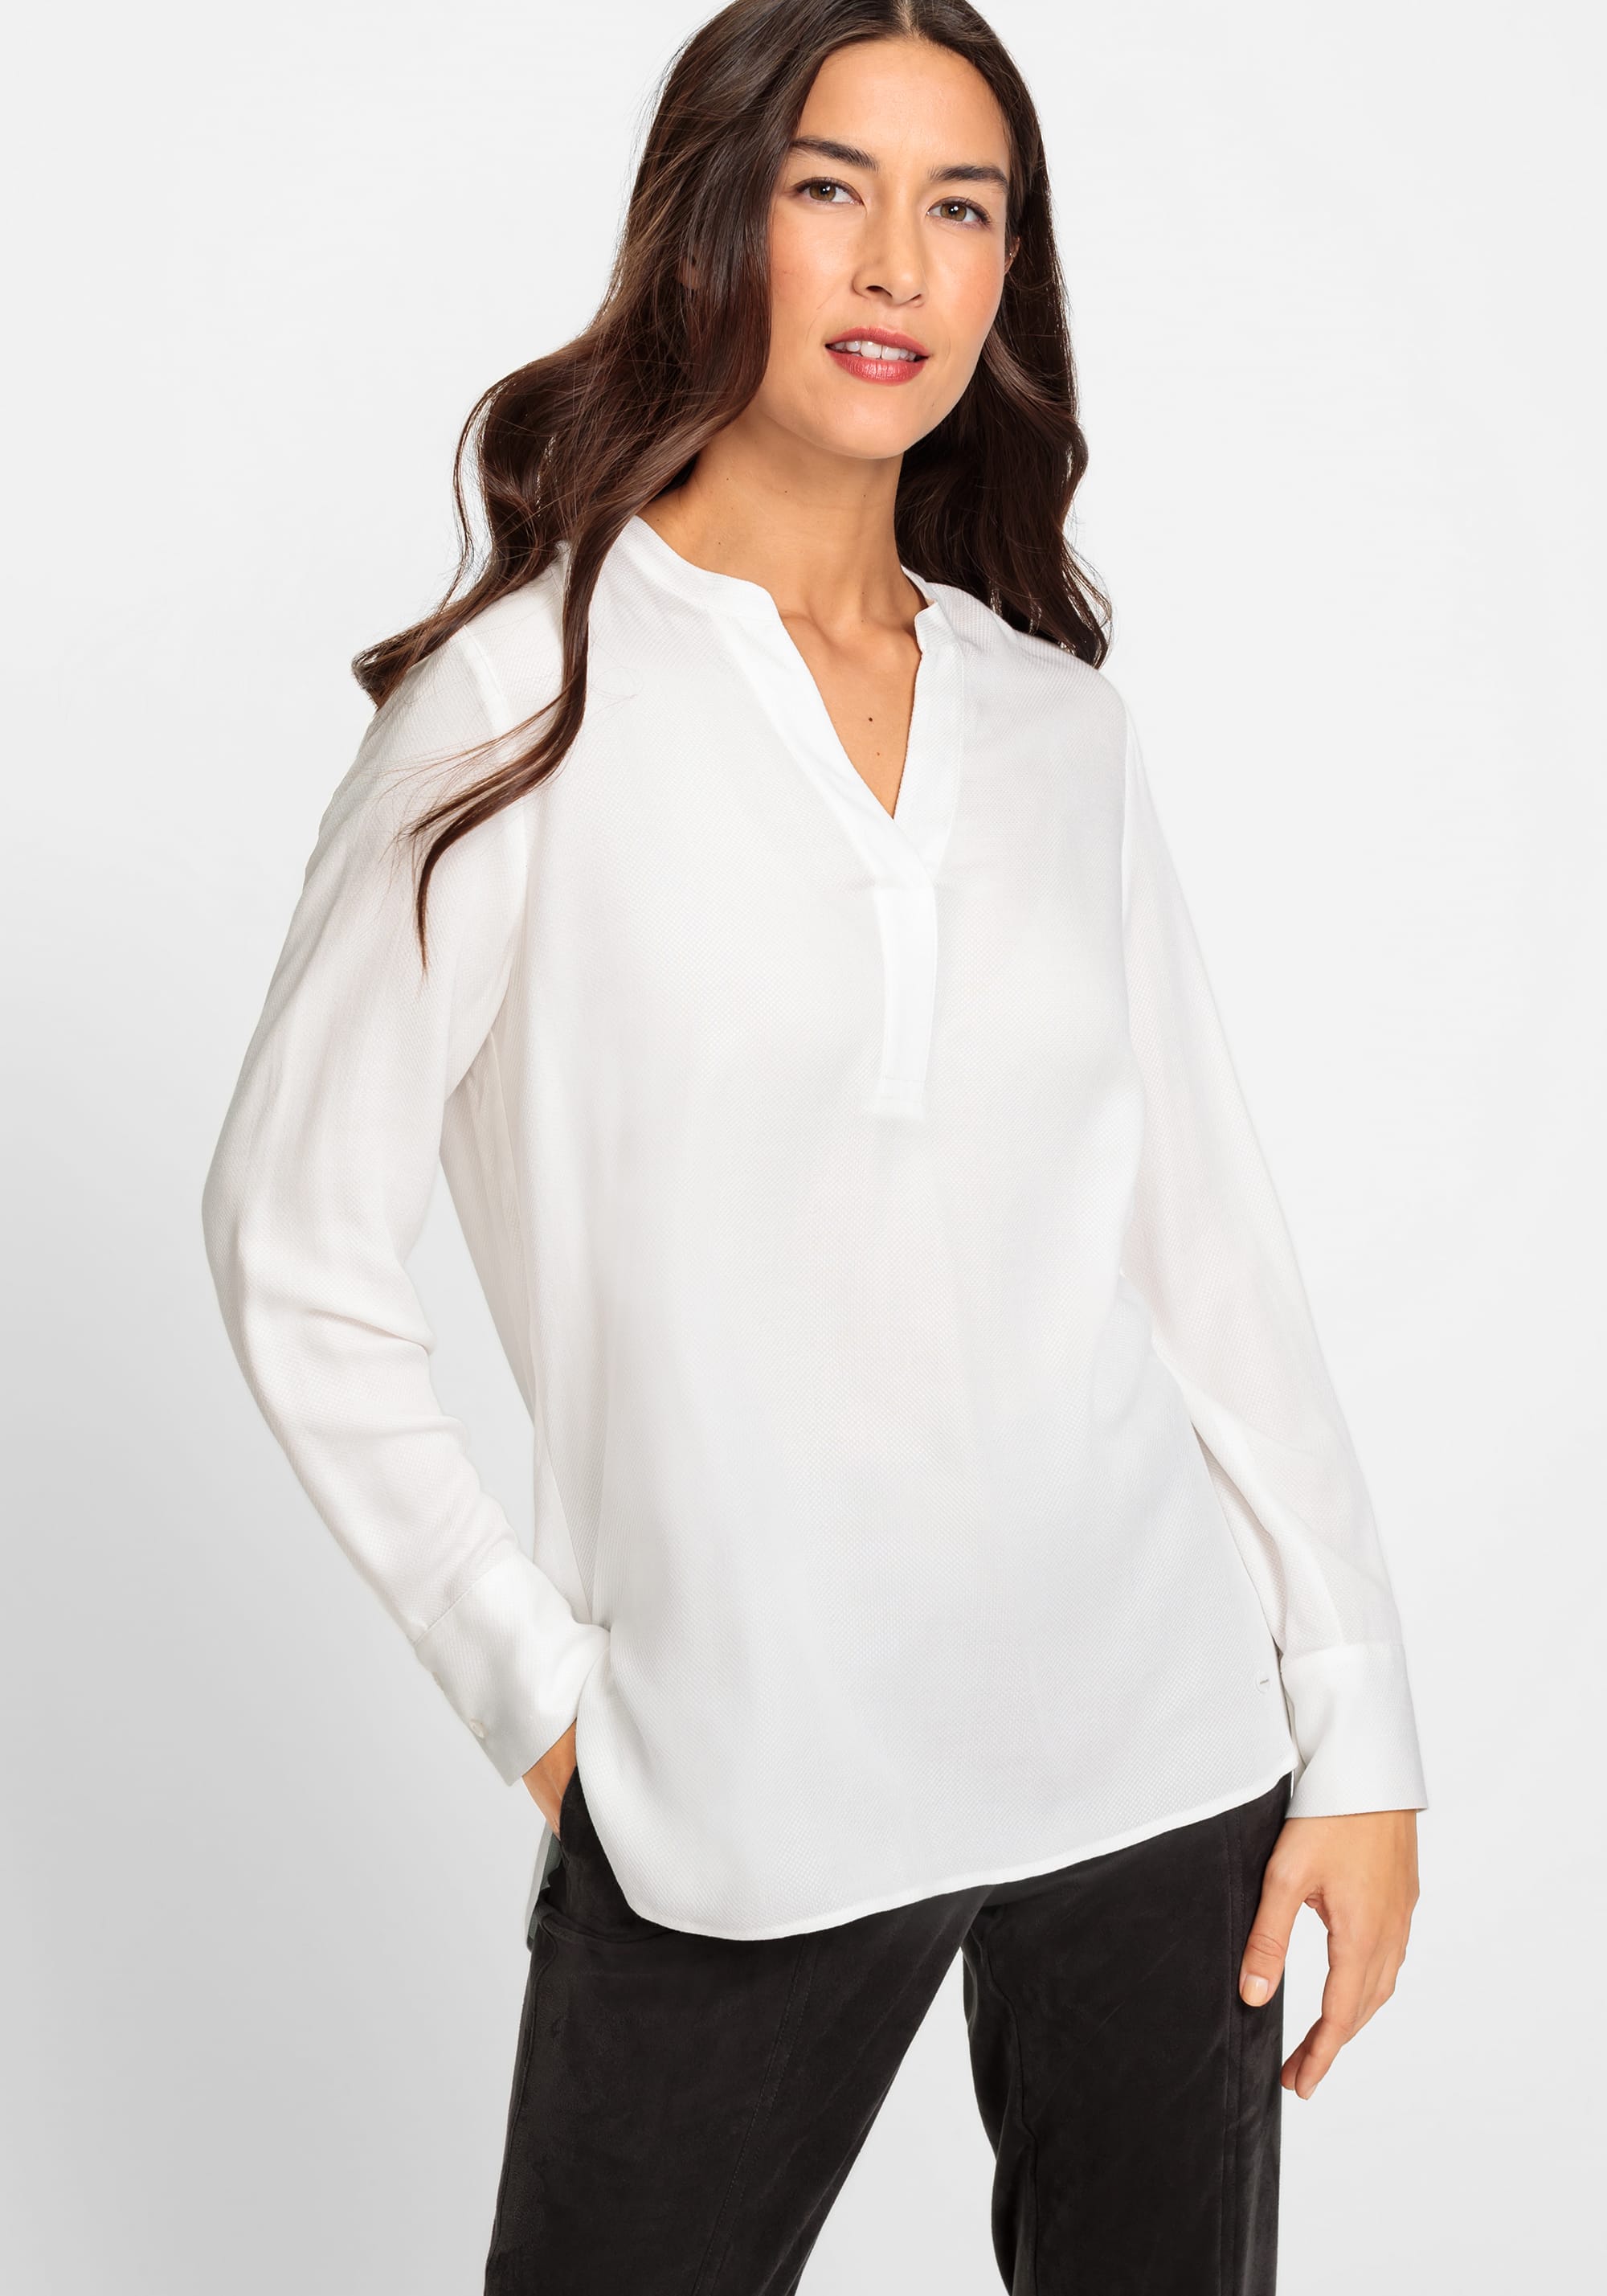 fesfesfes Women's Long Sleeve Crew Neck Tunic Tops Buttons Side